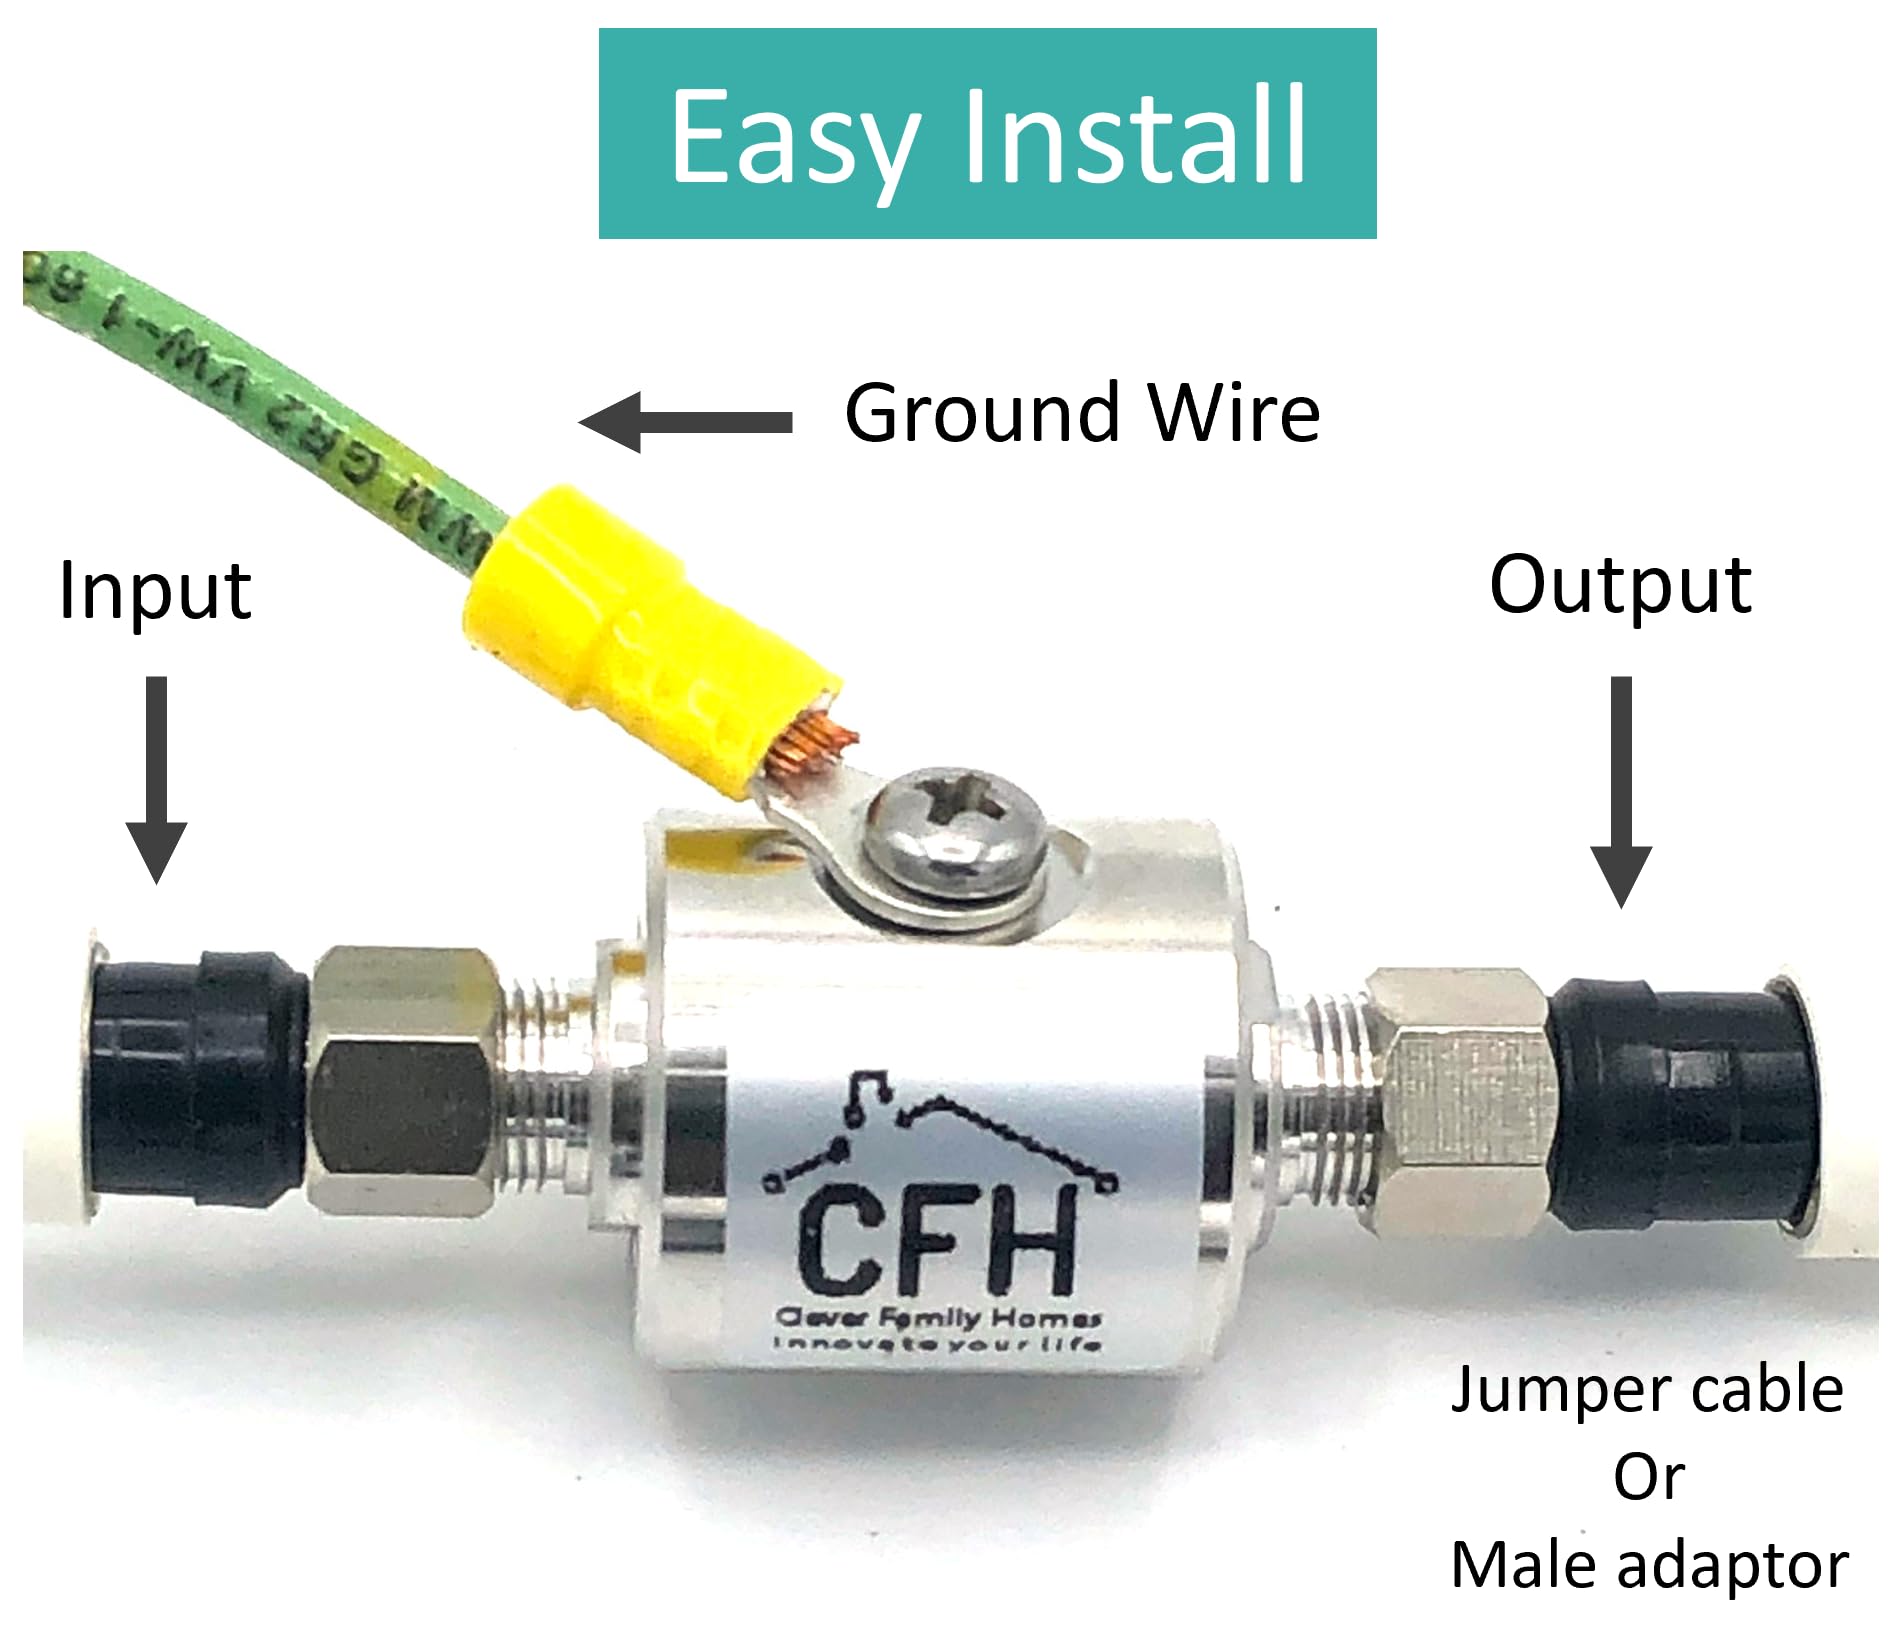 Clever Family Homes Coaxial RG6 Surge Protector Kit with Jumper Cable, Ground Wire, Spare GDT, and Male-to-Male Adaptor